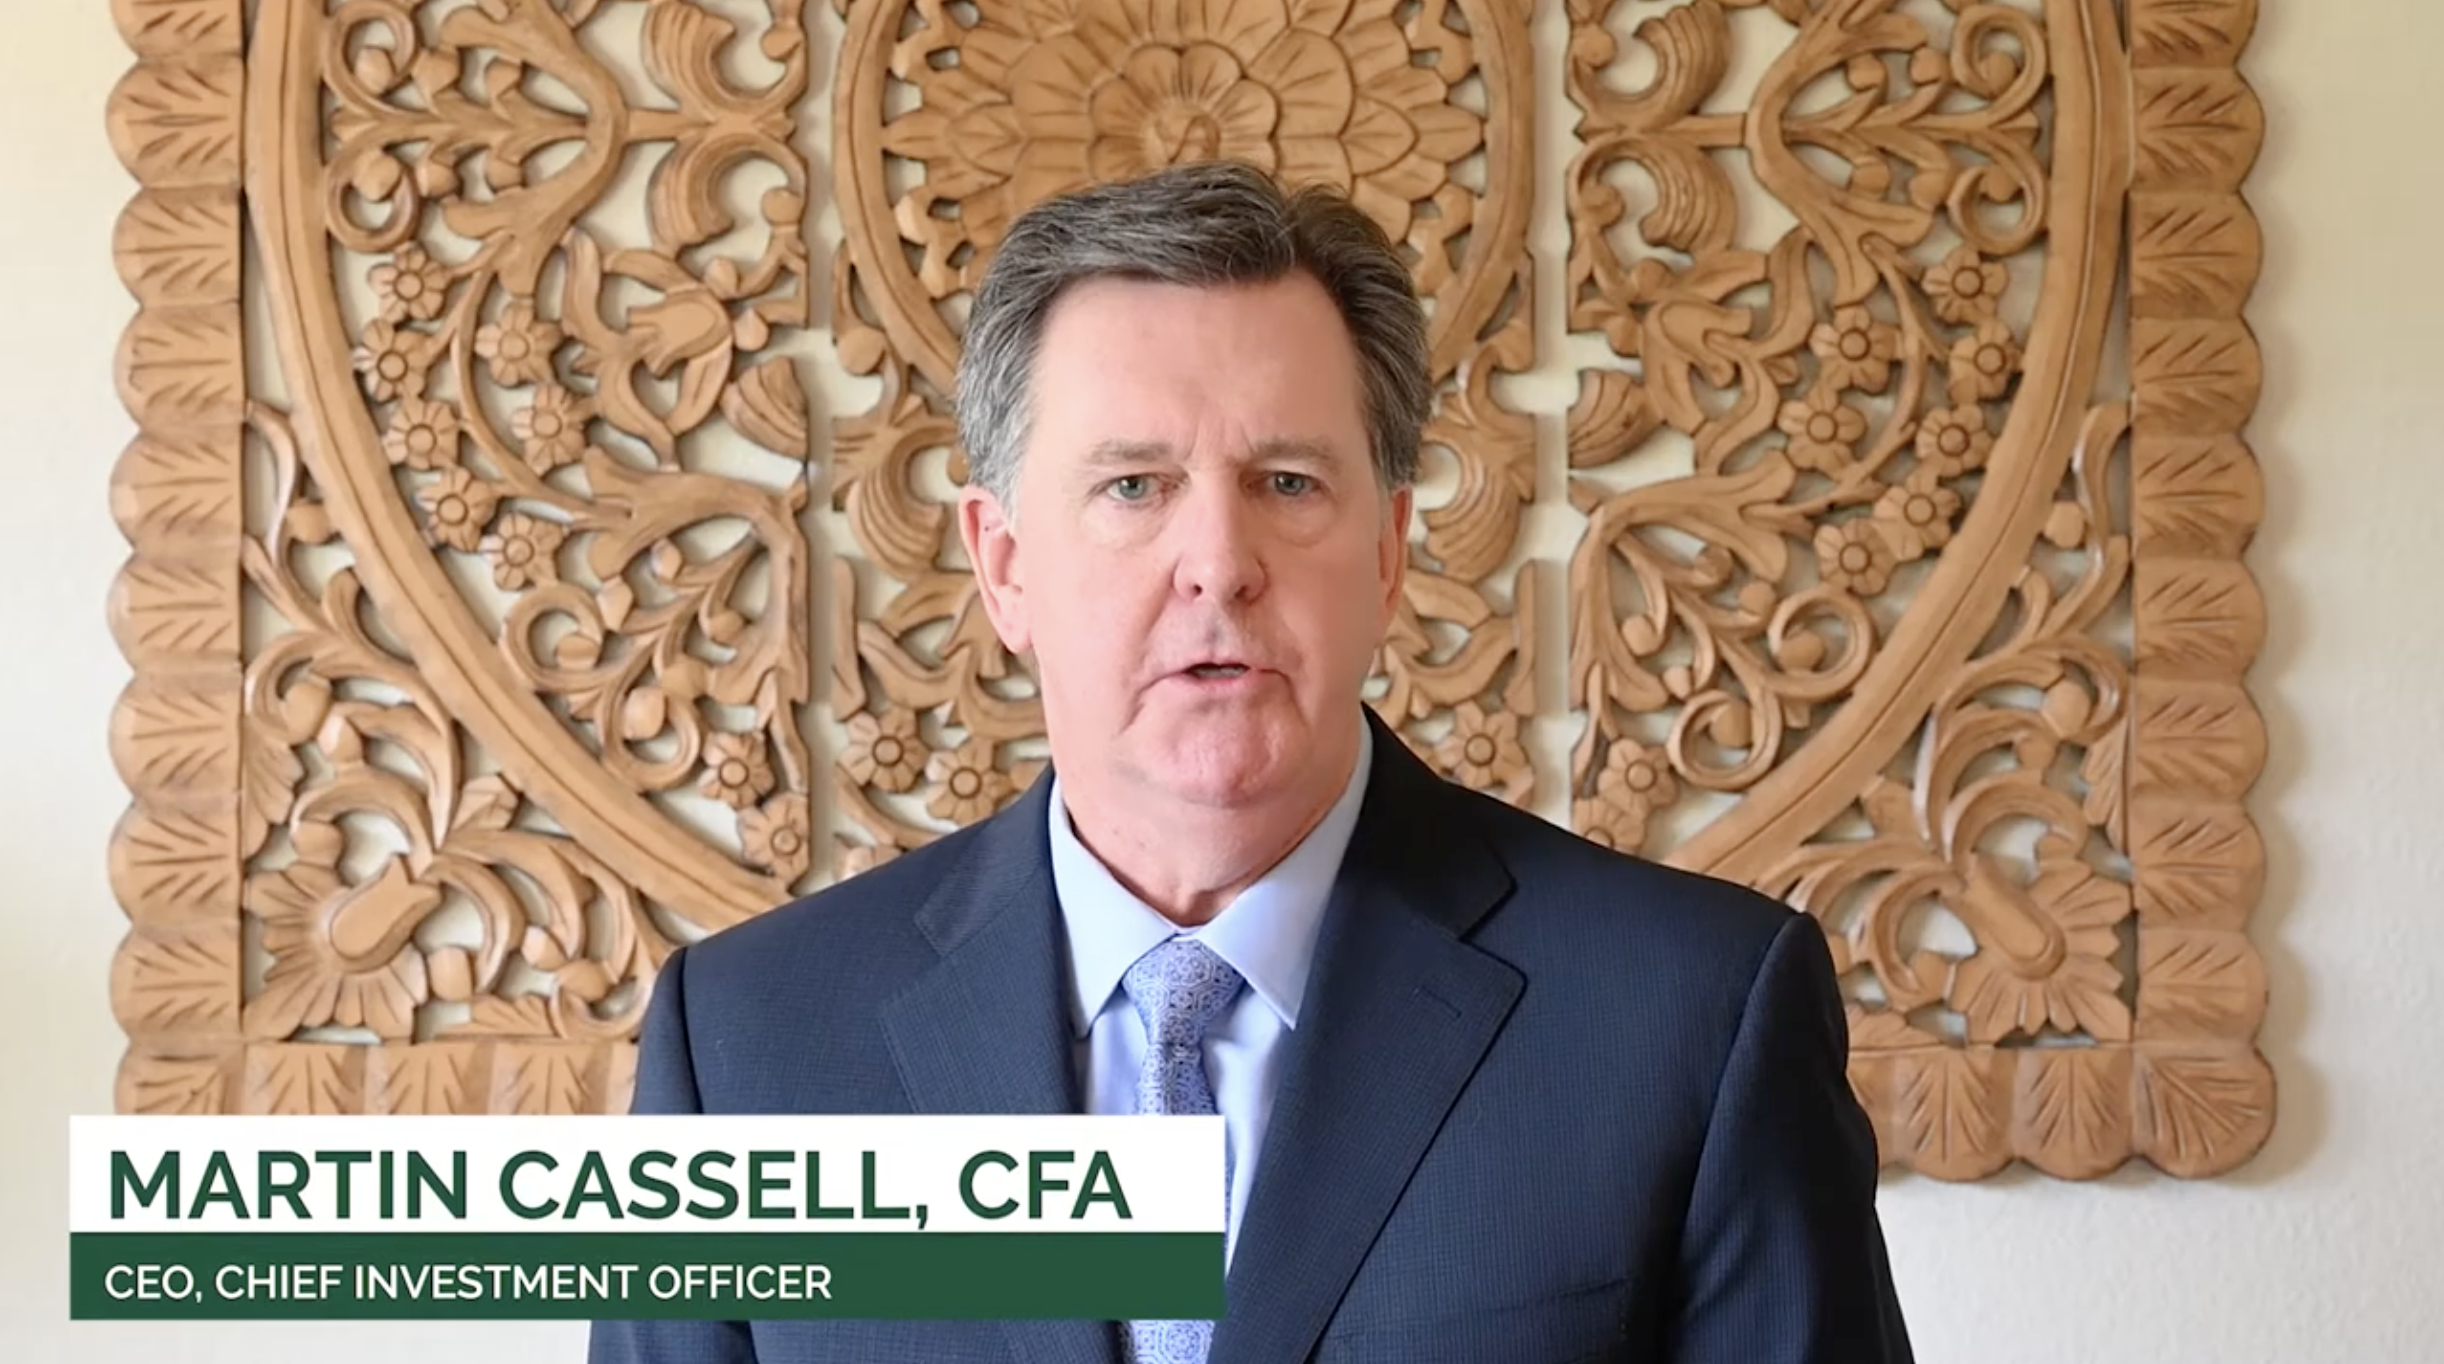 A message from the CEO of Chandler Asset Management Inc.